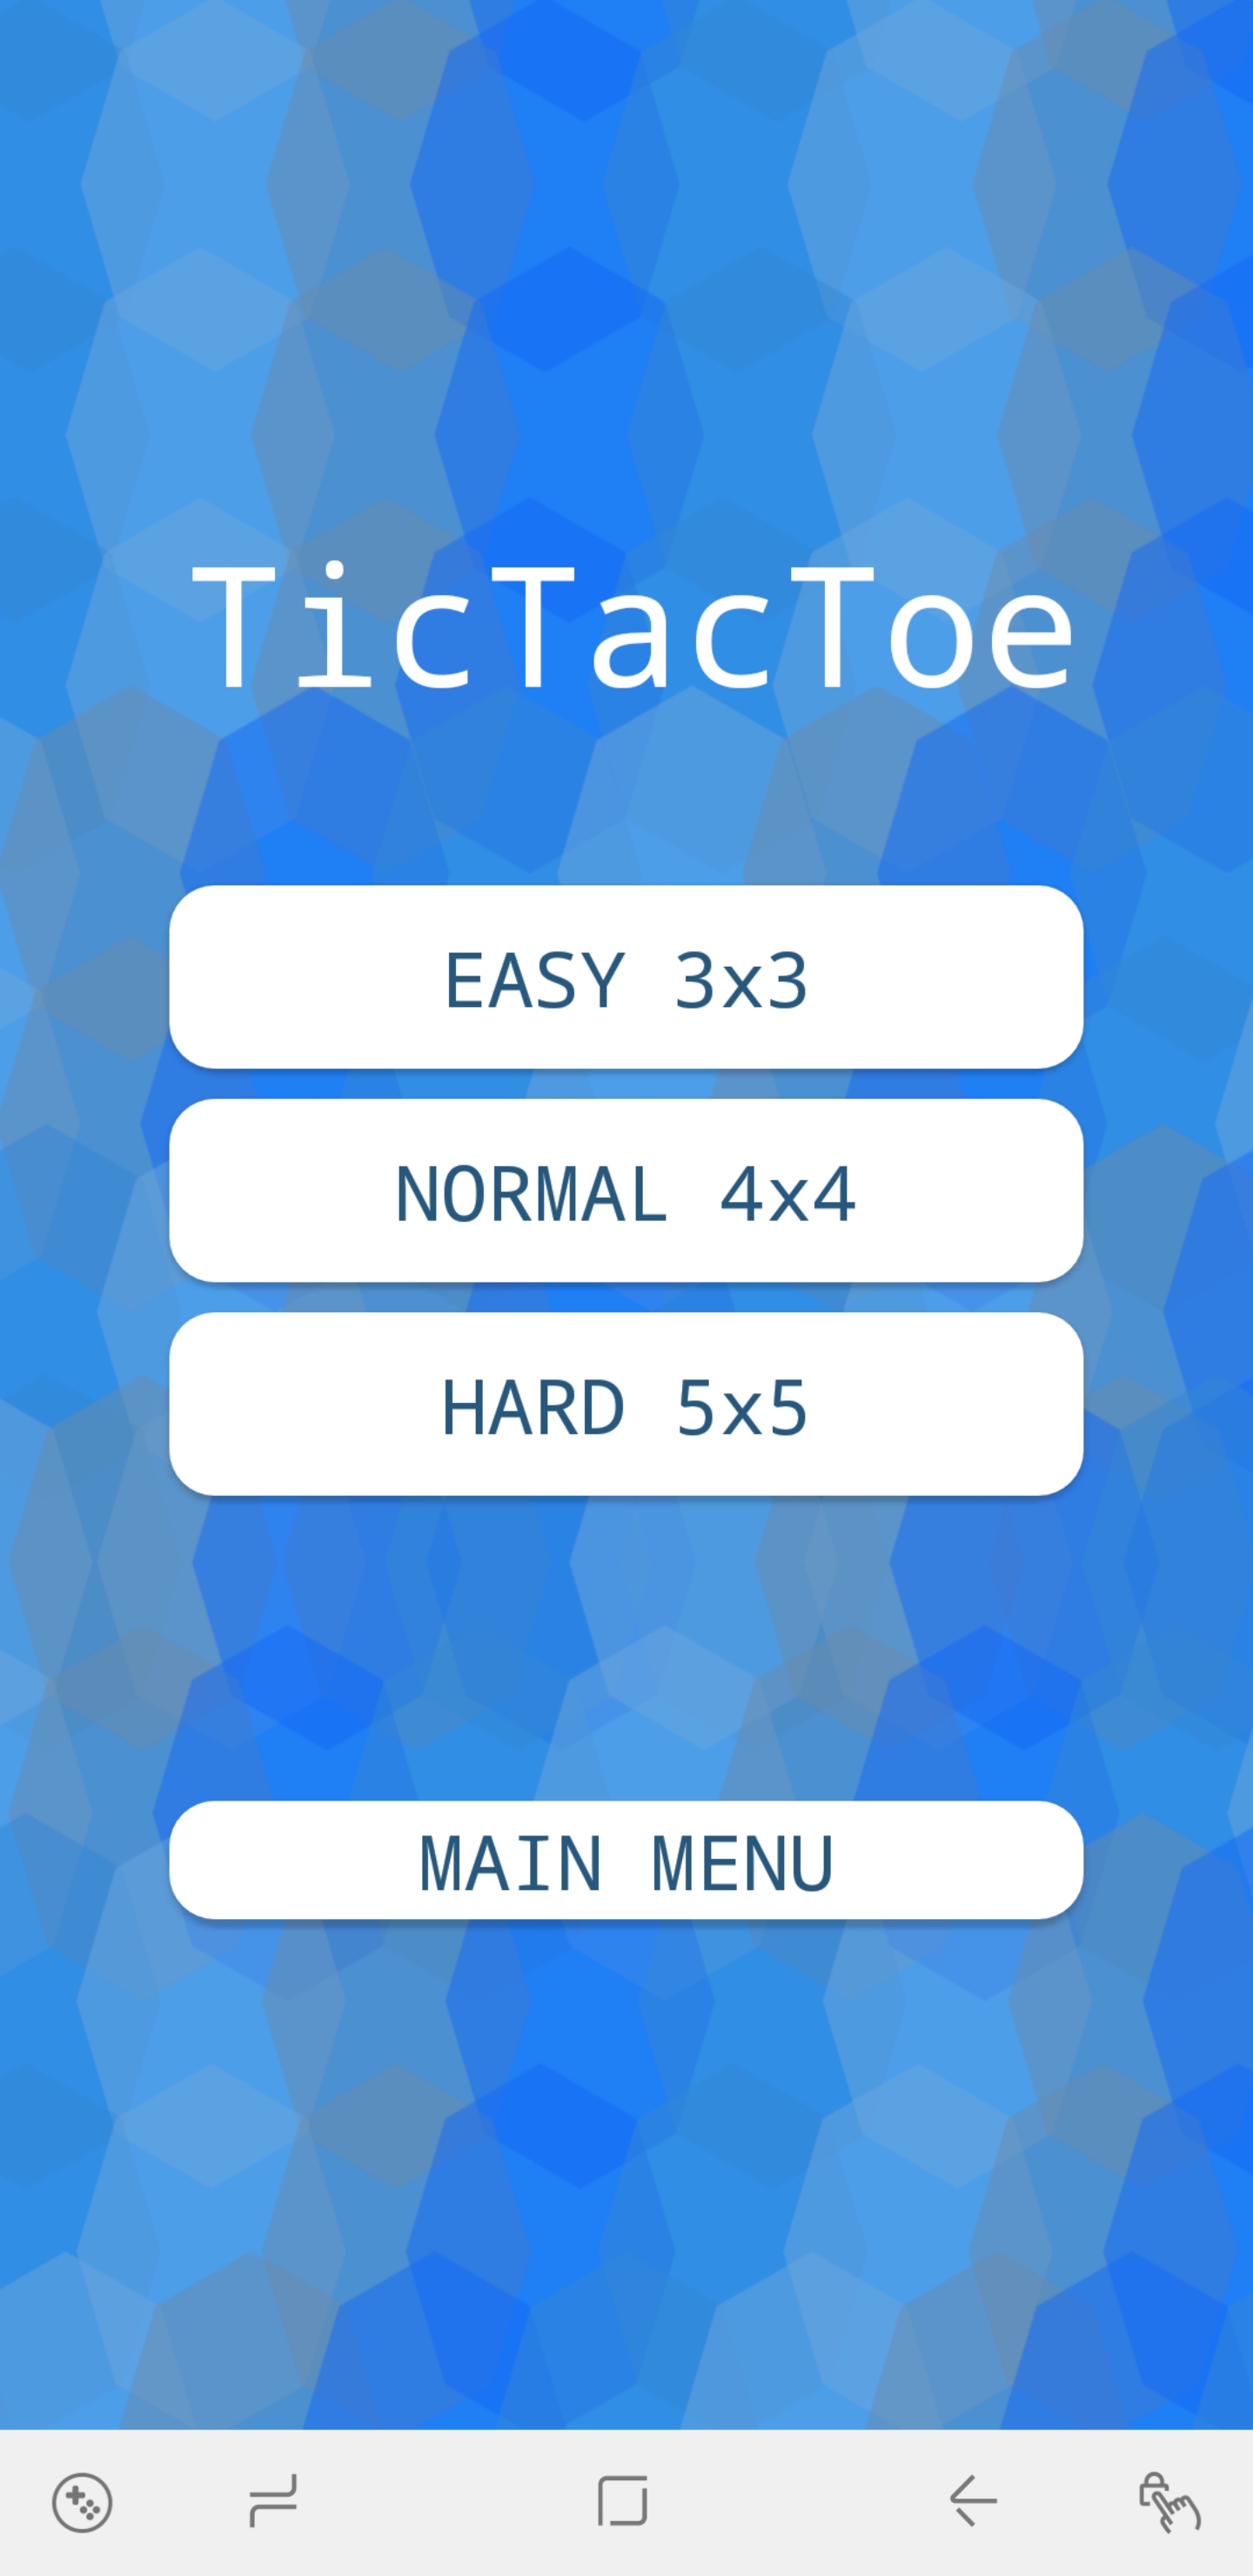 GitHub - Elian96/TicTacToe: A tic tac toe game created with Android studio  using java as the main language for the project